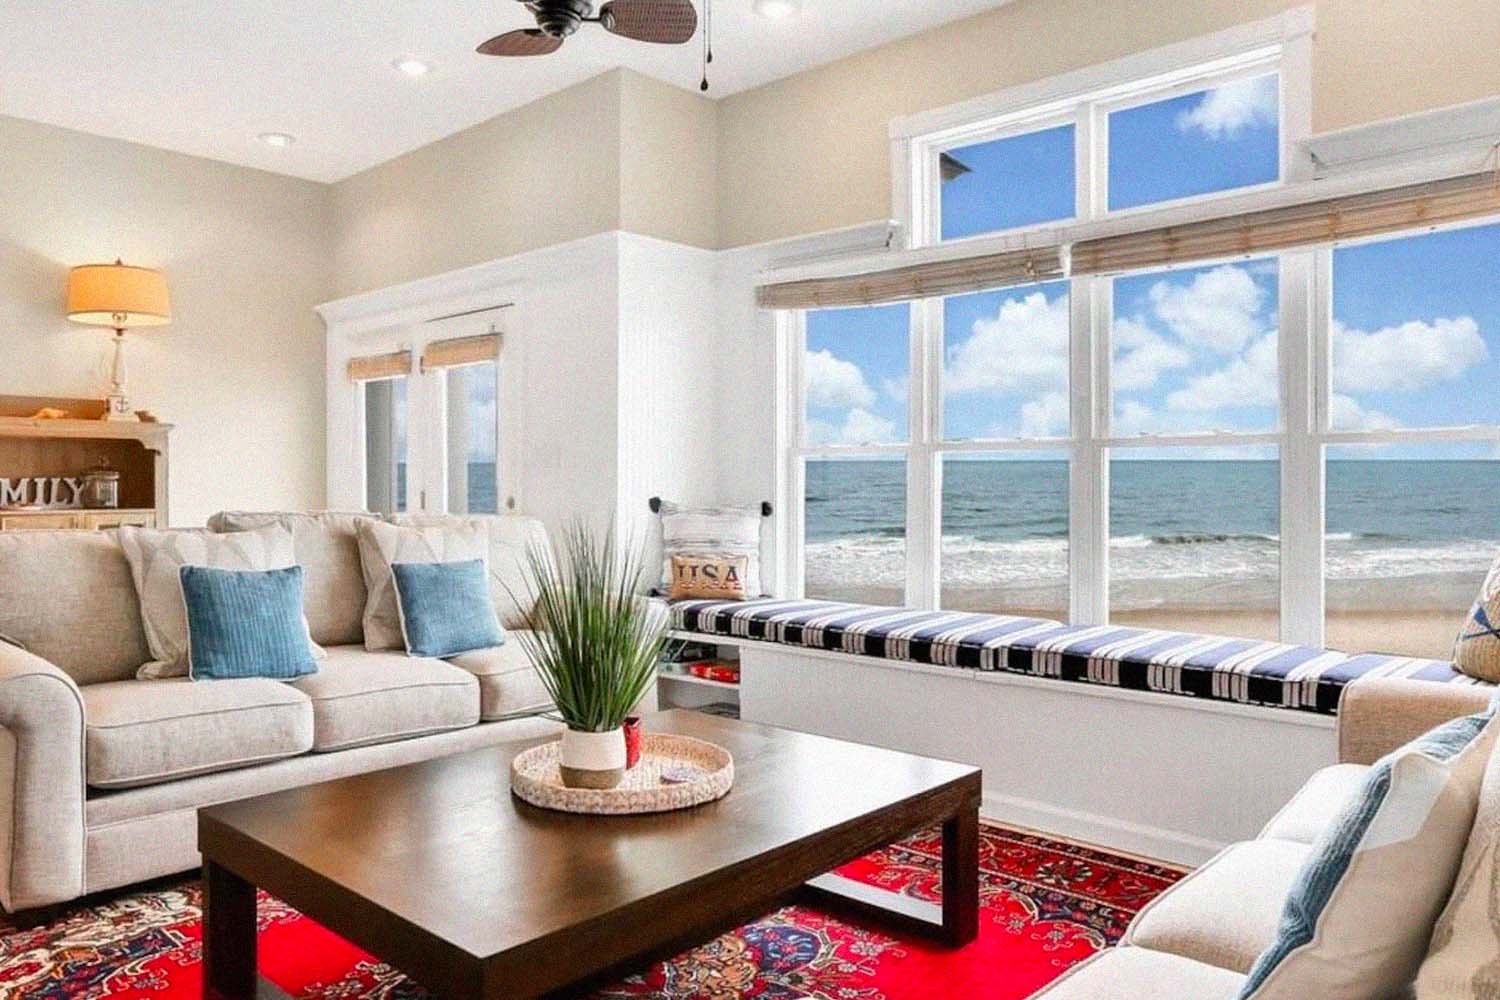 Oceanfront, newly renovated beach home